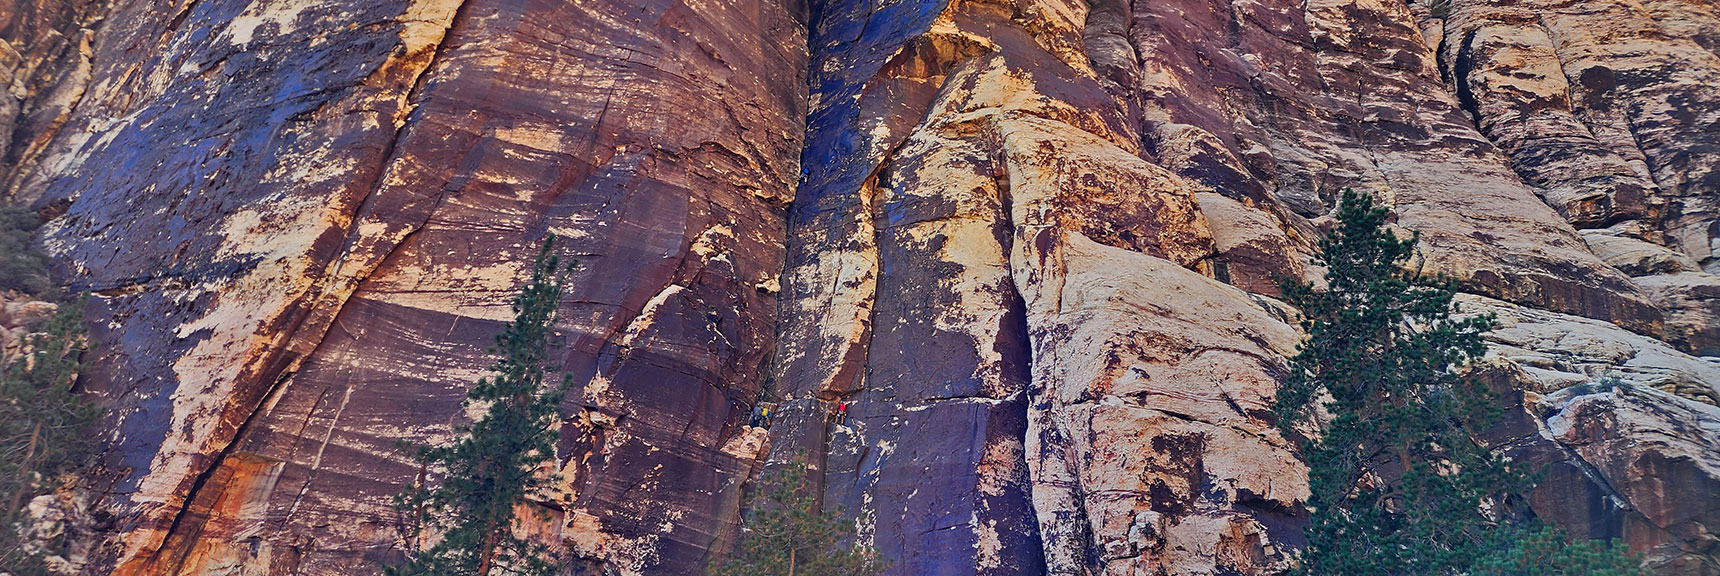 Look Carefully for Rock Climber (Center Bottom). Long Way to Go! | Rock Climber Observations | Pine Creek Canyon | Rainbow Mountain Wilderness, Nevada